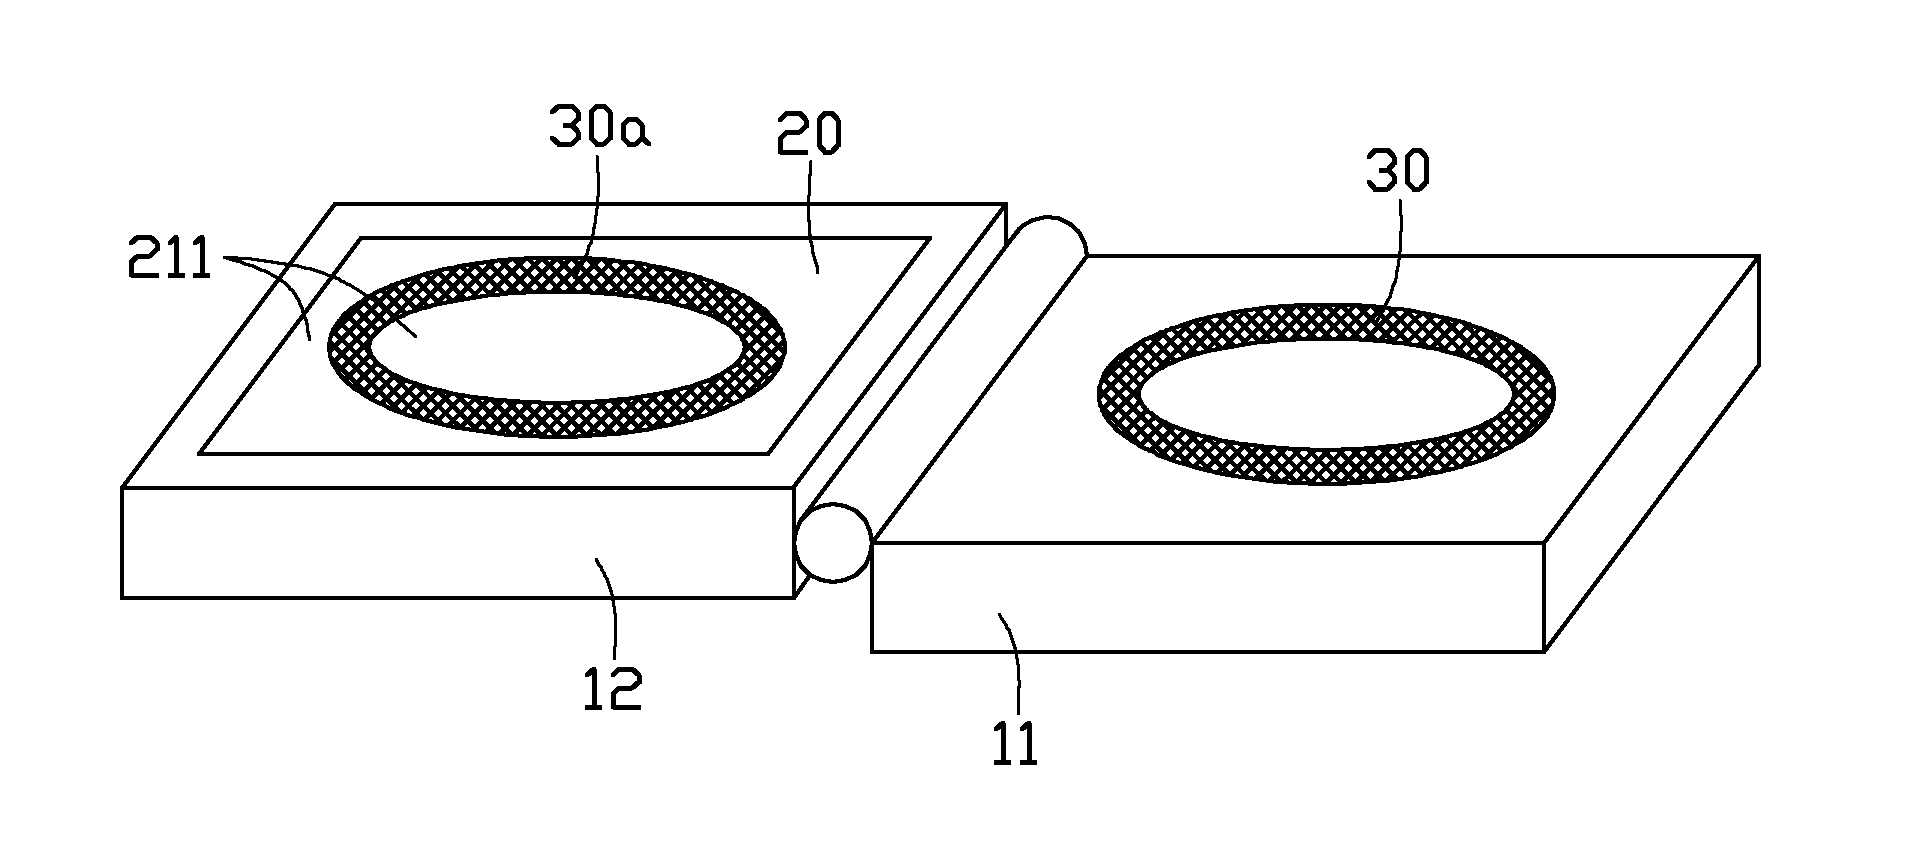 Method for forming a patterned coating